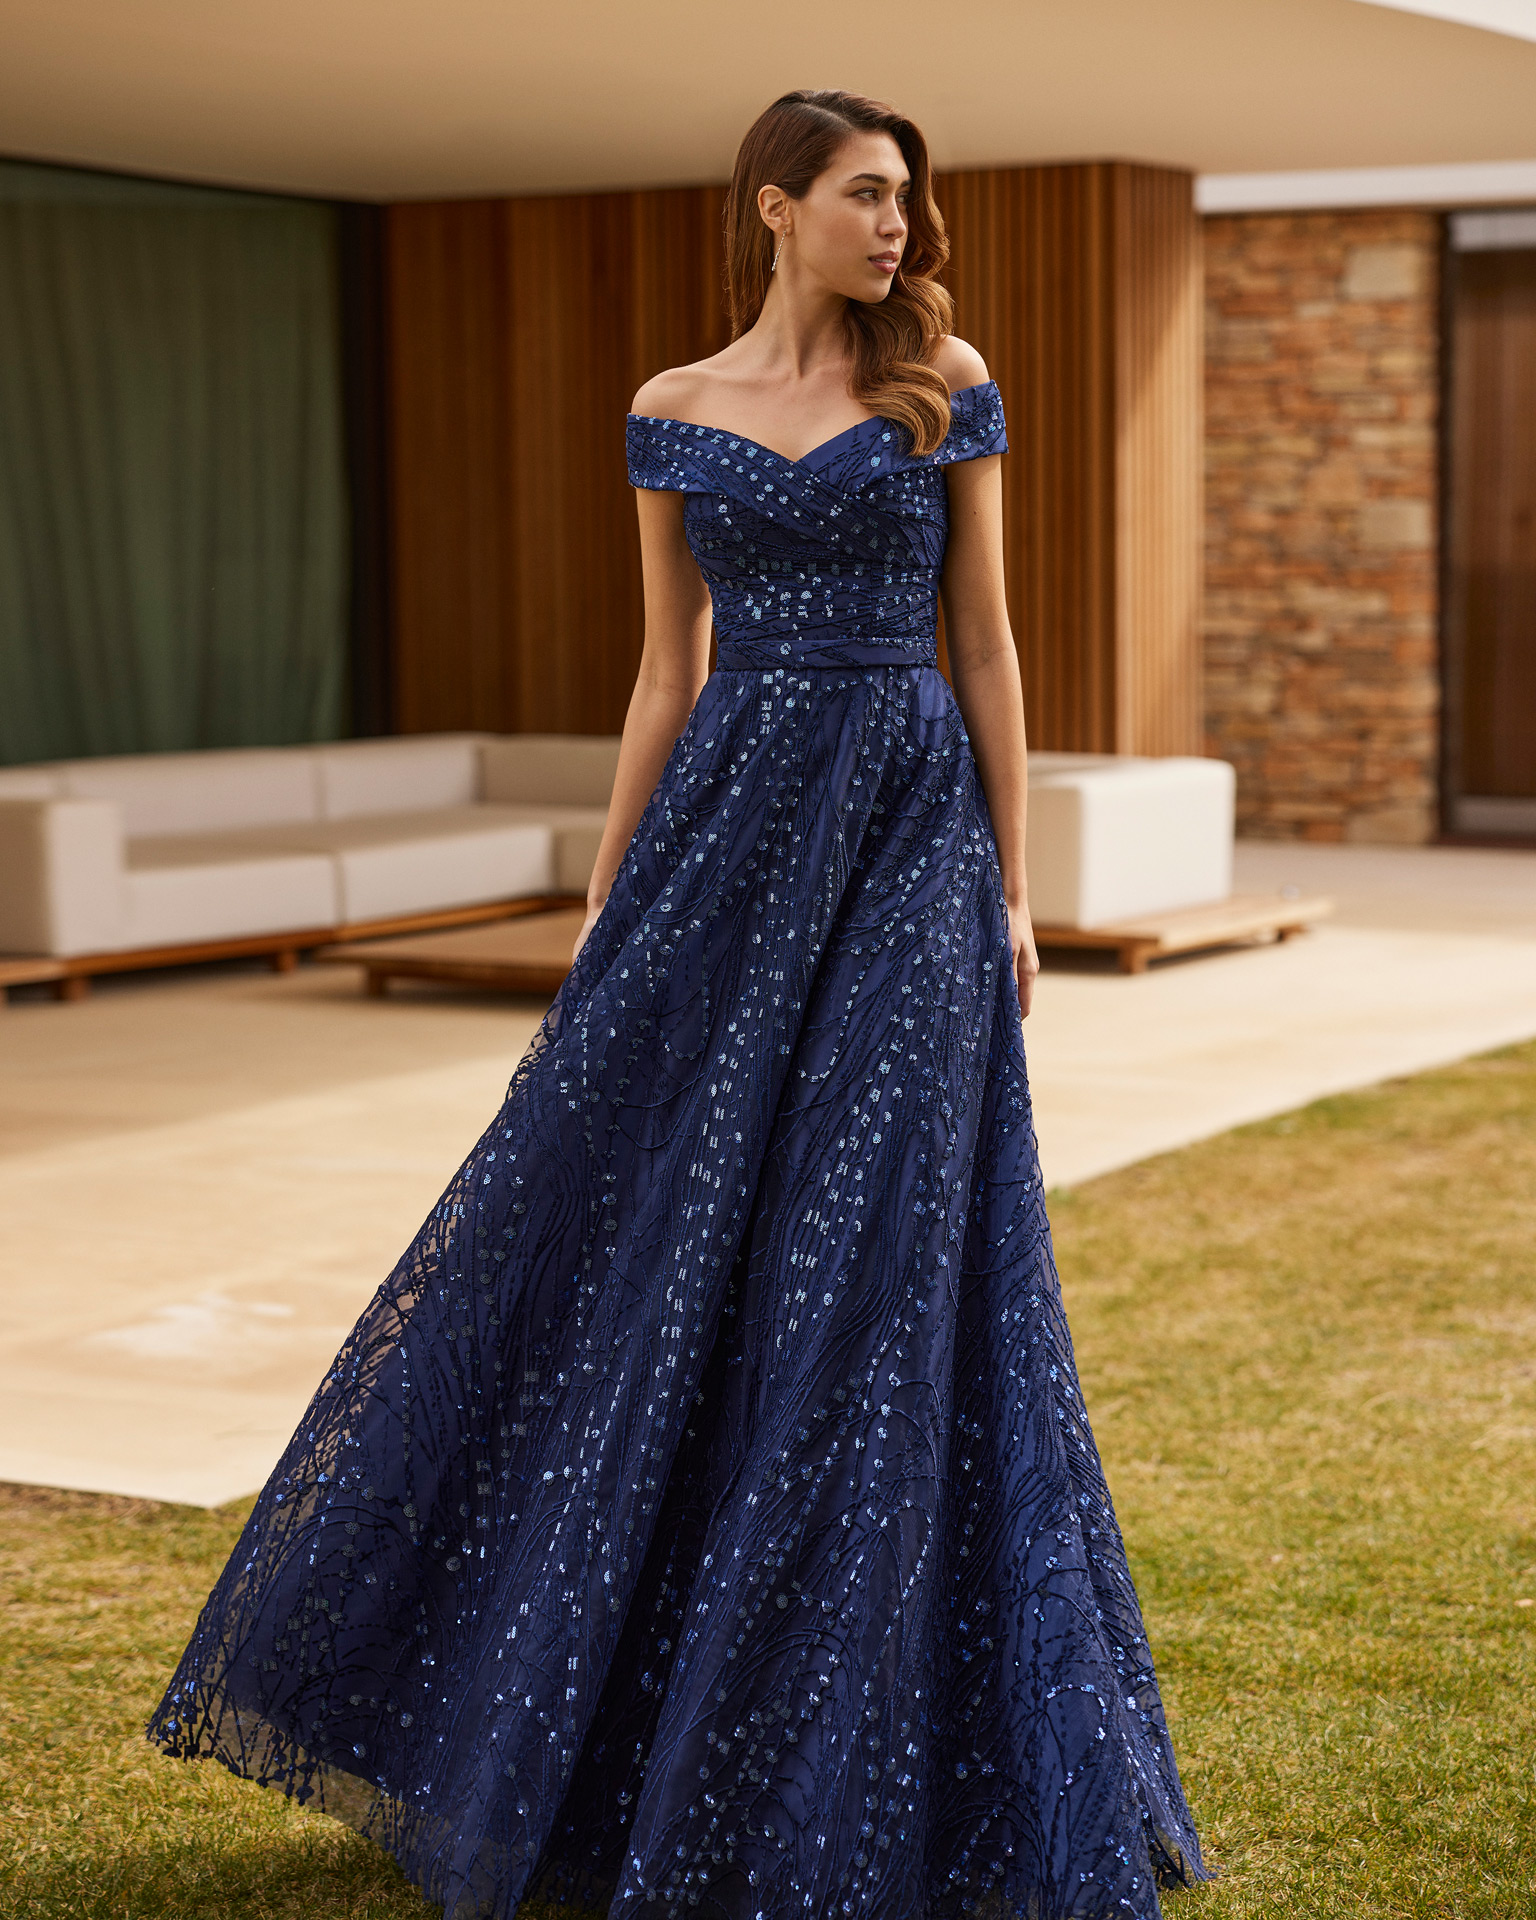 Elegant long evening dress. Crafted with tulle with beadwork embroidery details. With off-the-shoulder neckline. Exclusive Marfil Barcelona look. MARFIL_BARCELONA.